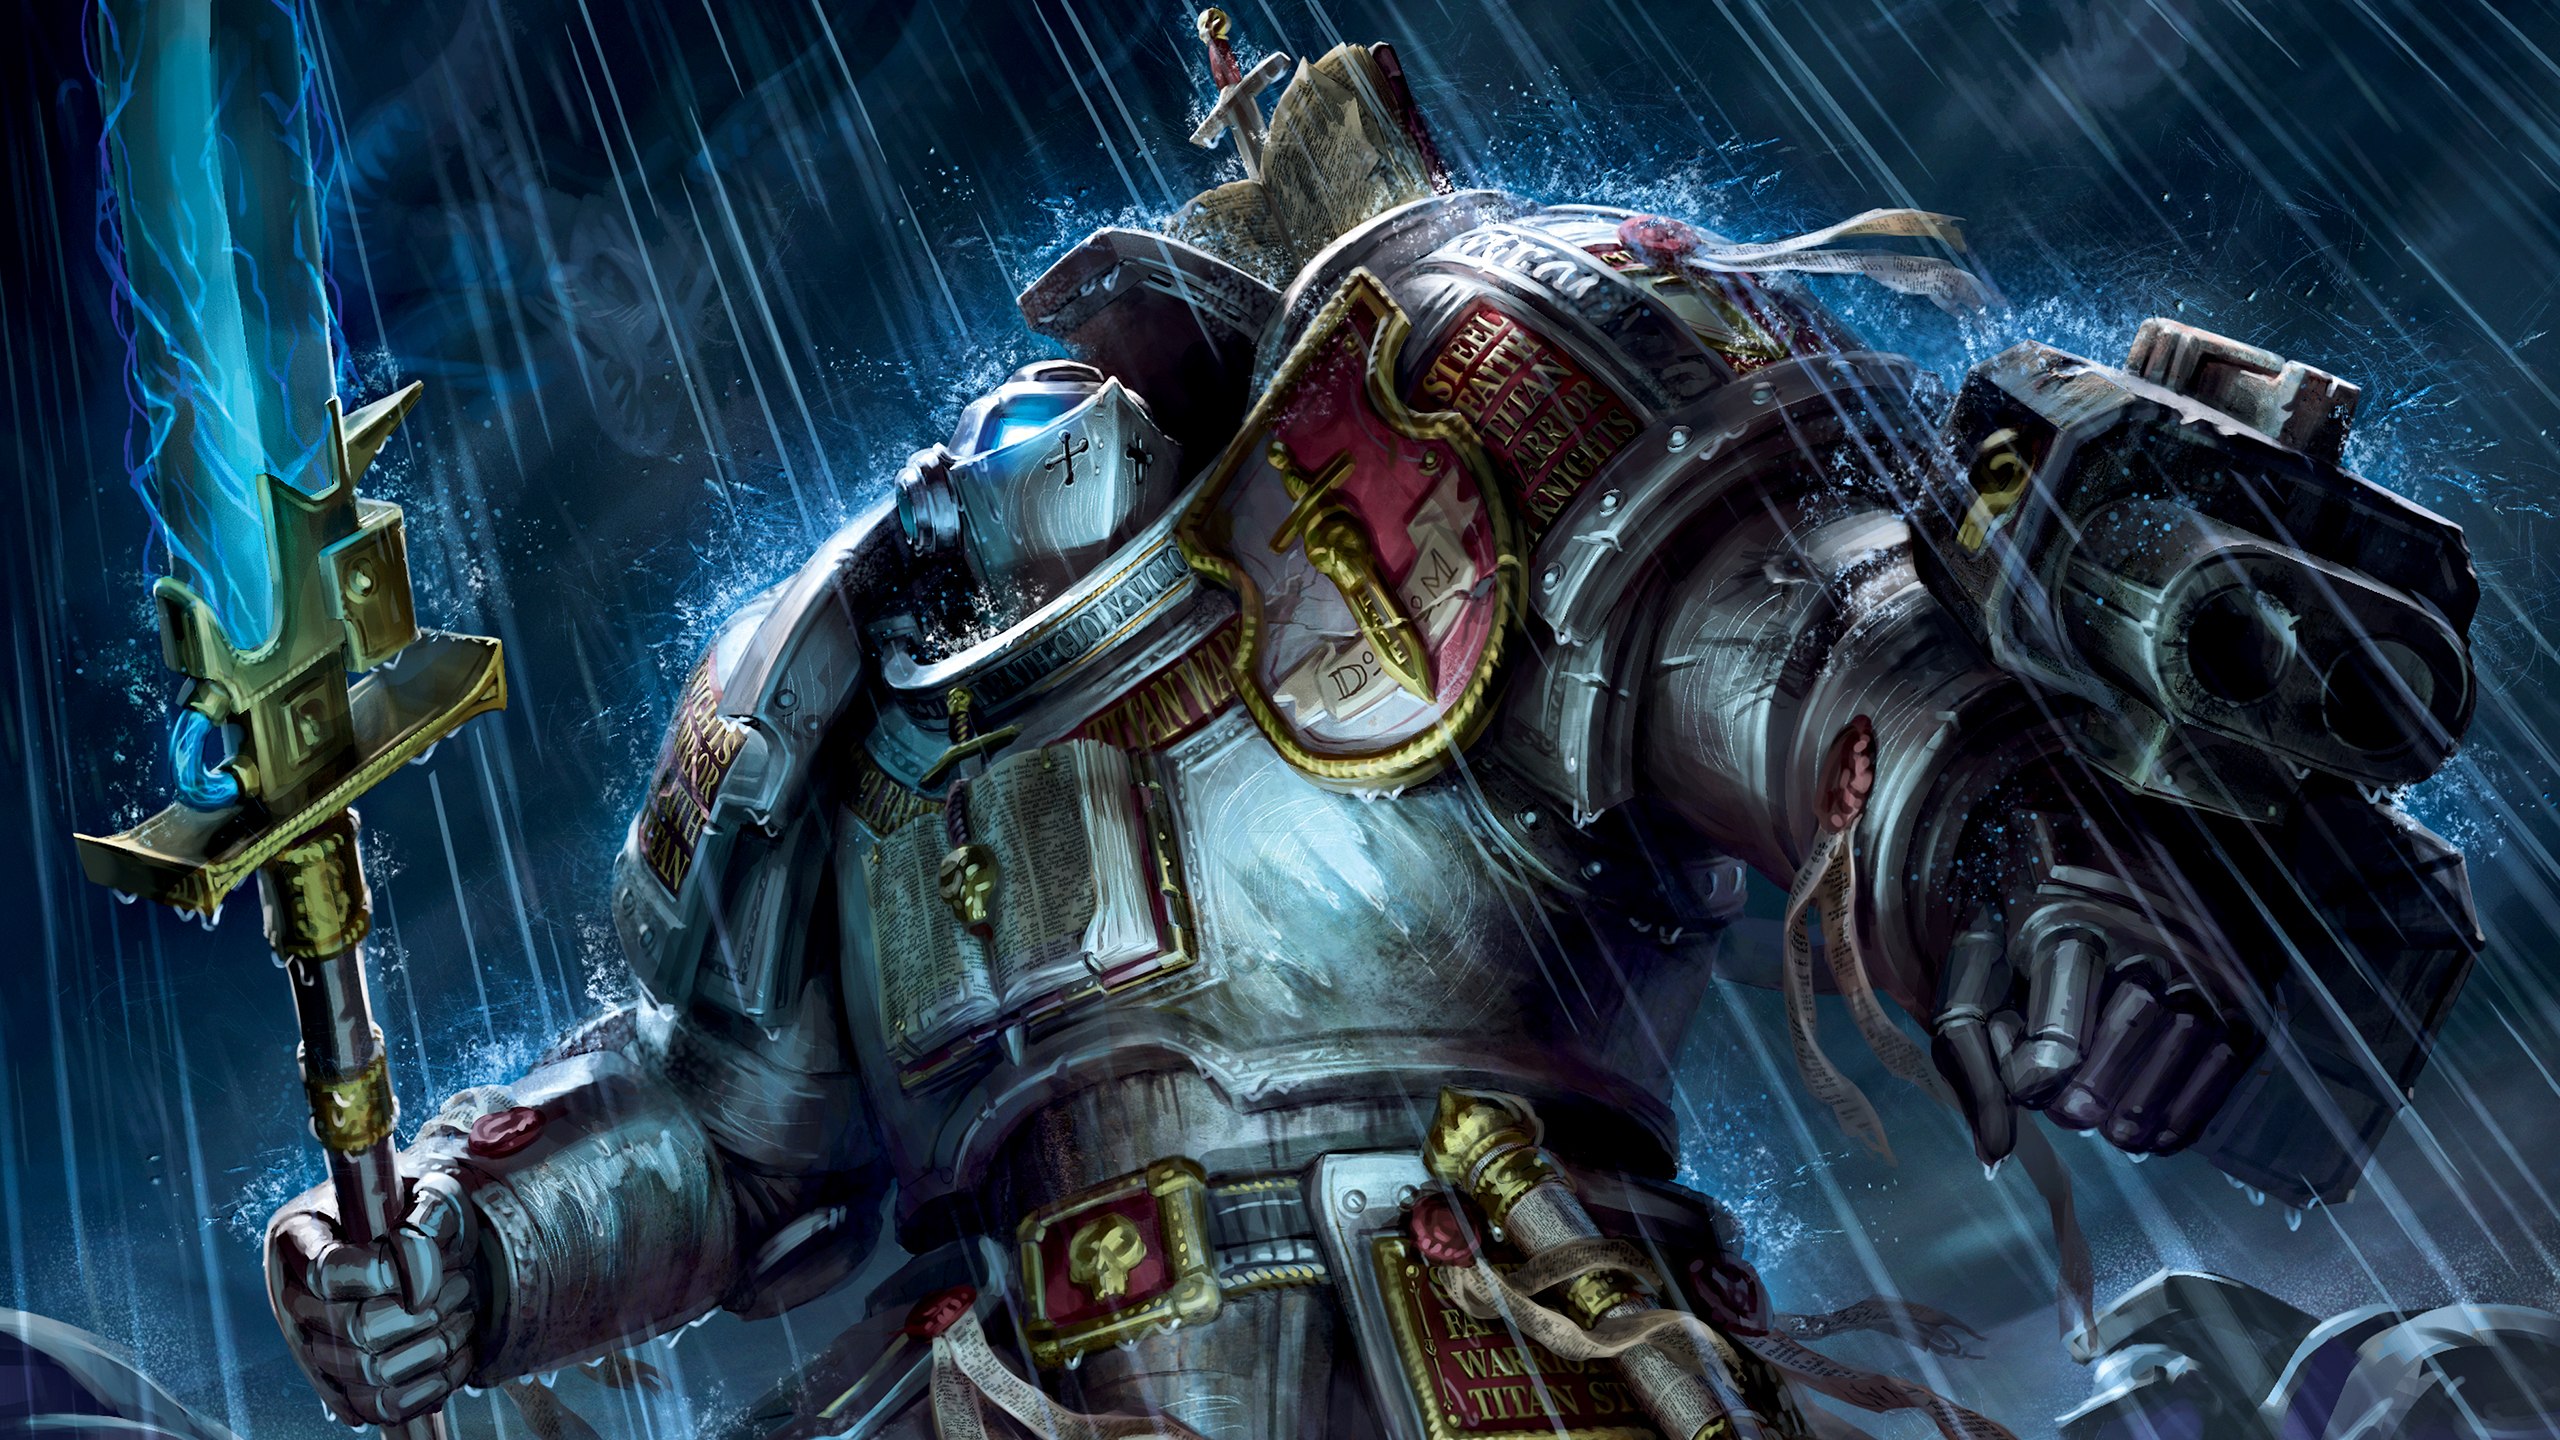 grey knights wallpaper,action adventure game,fictional character,pc game,cg artwork,strategy video game